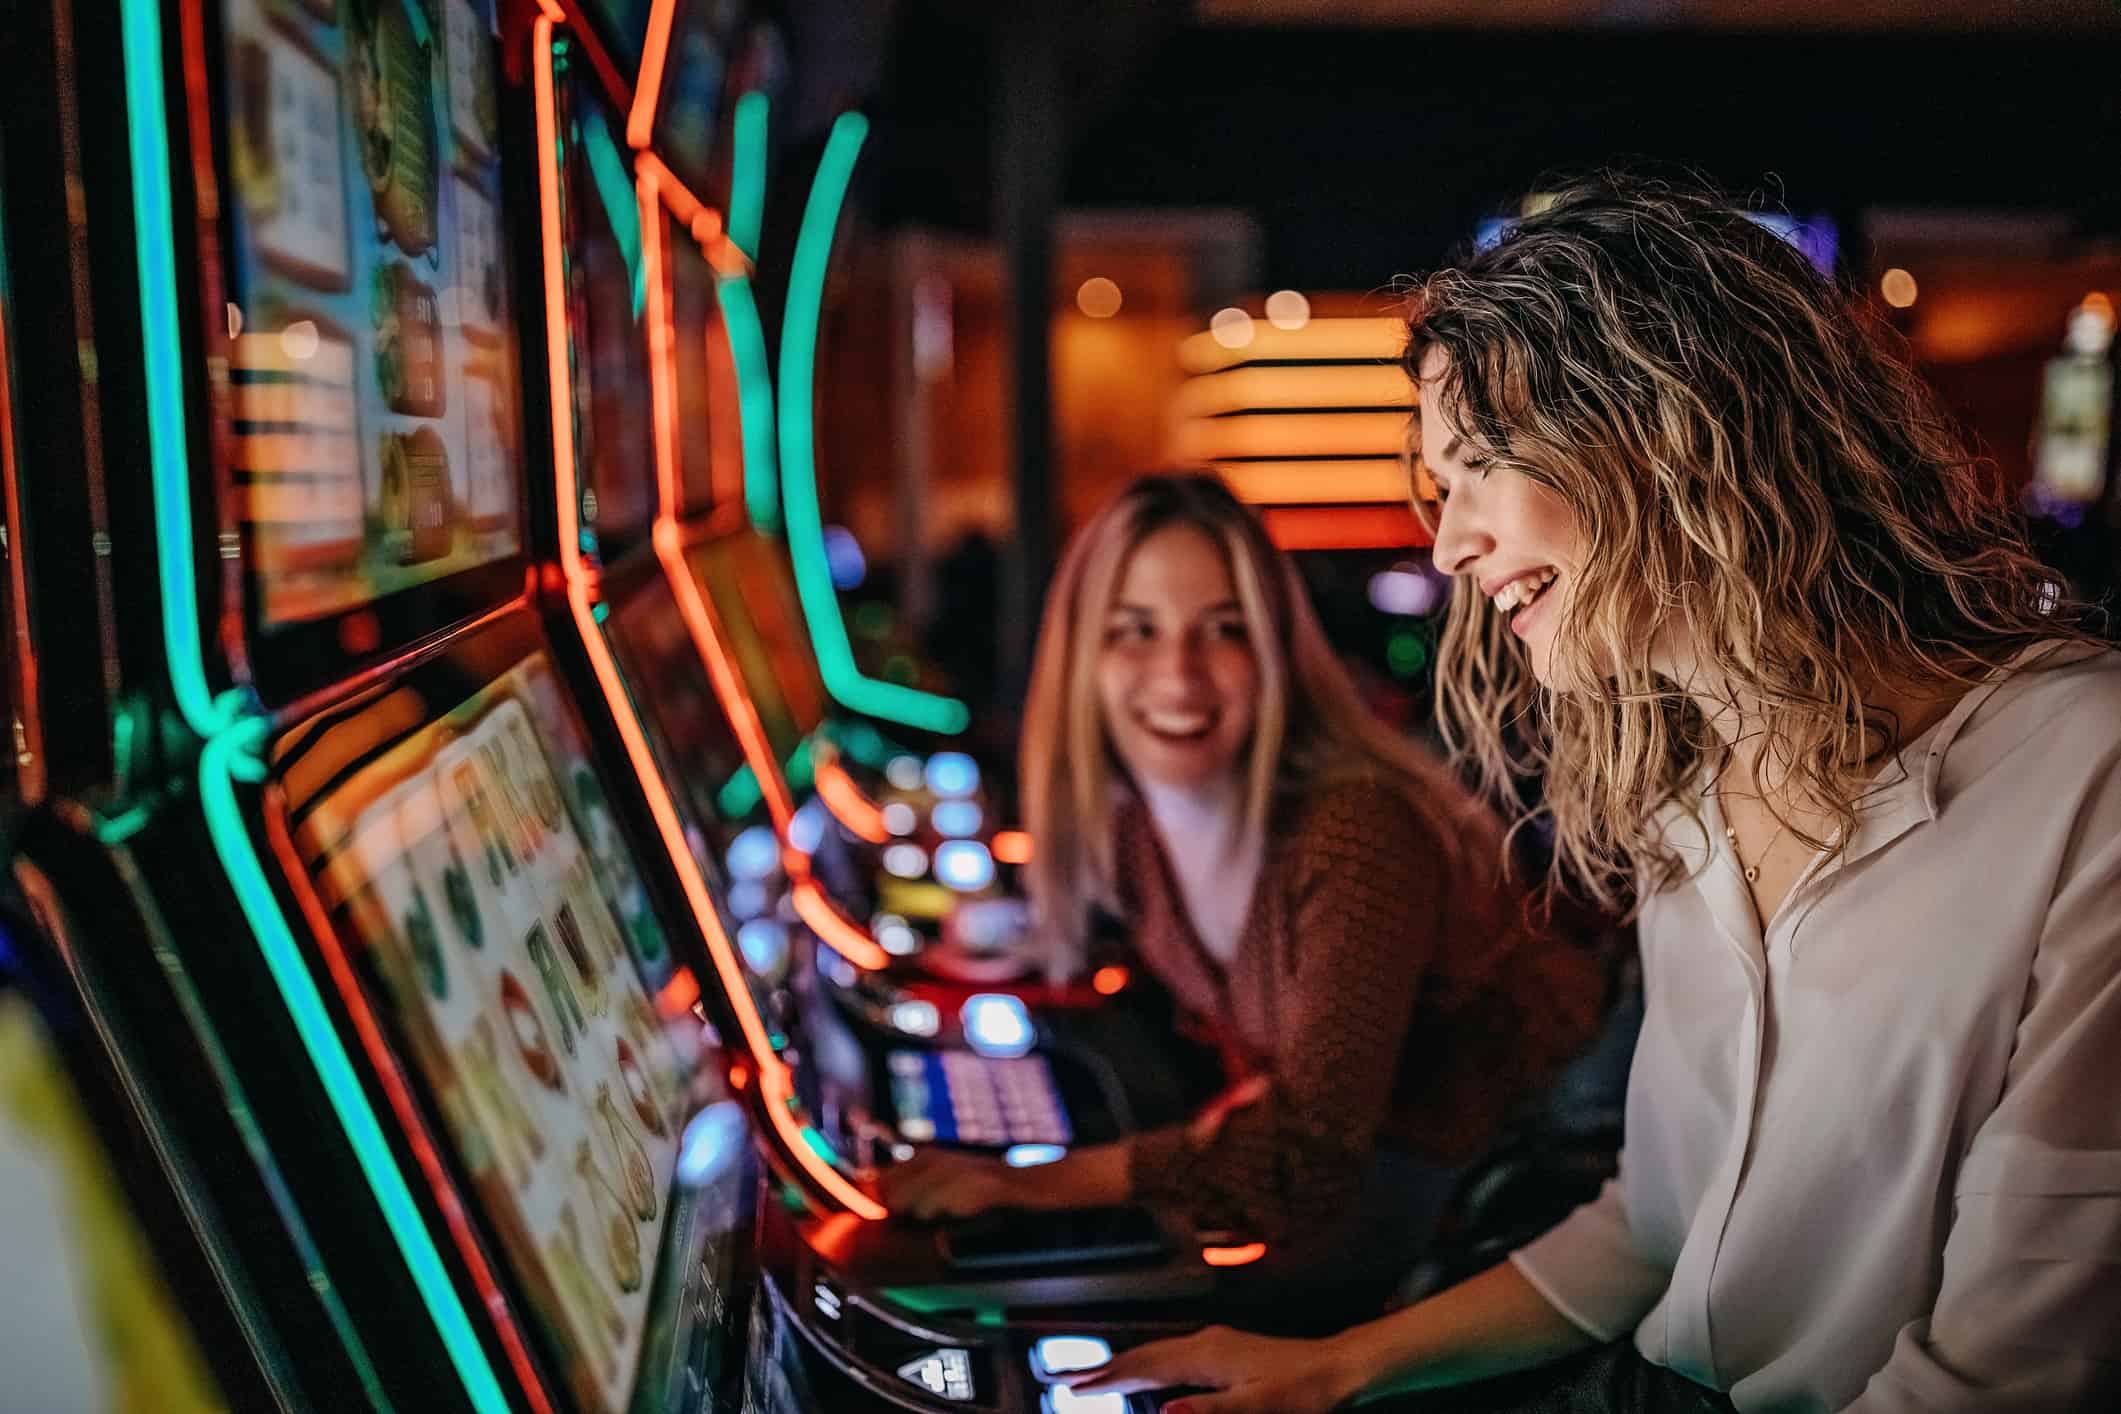 Two women at a casino